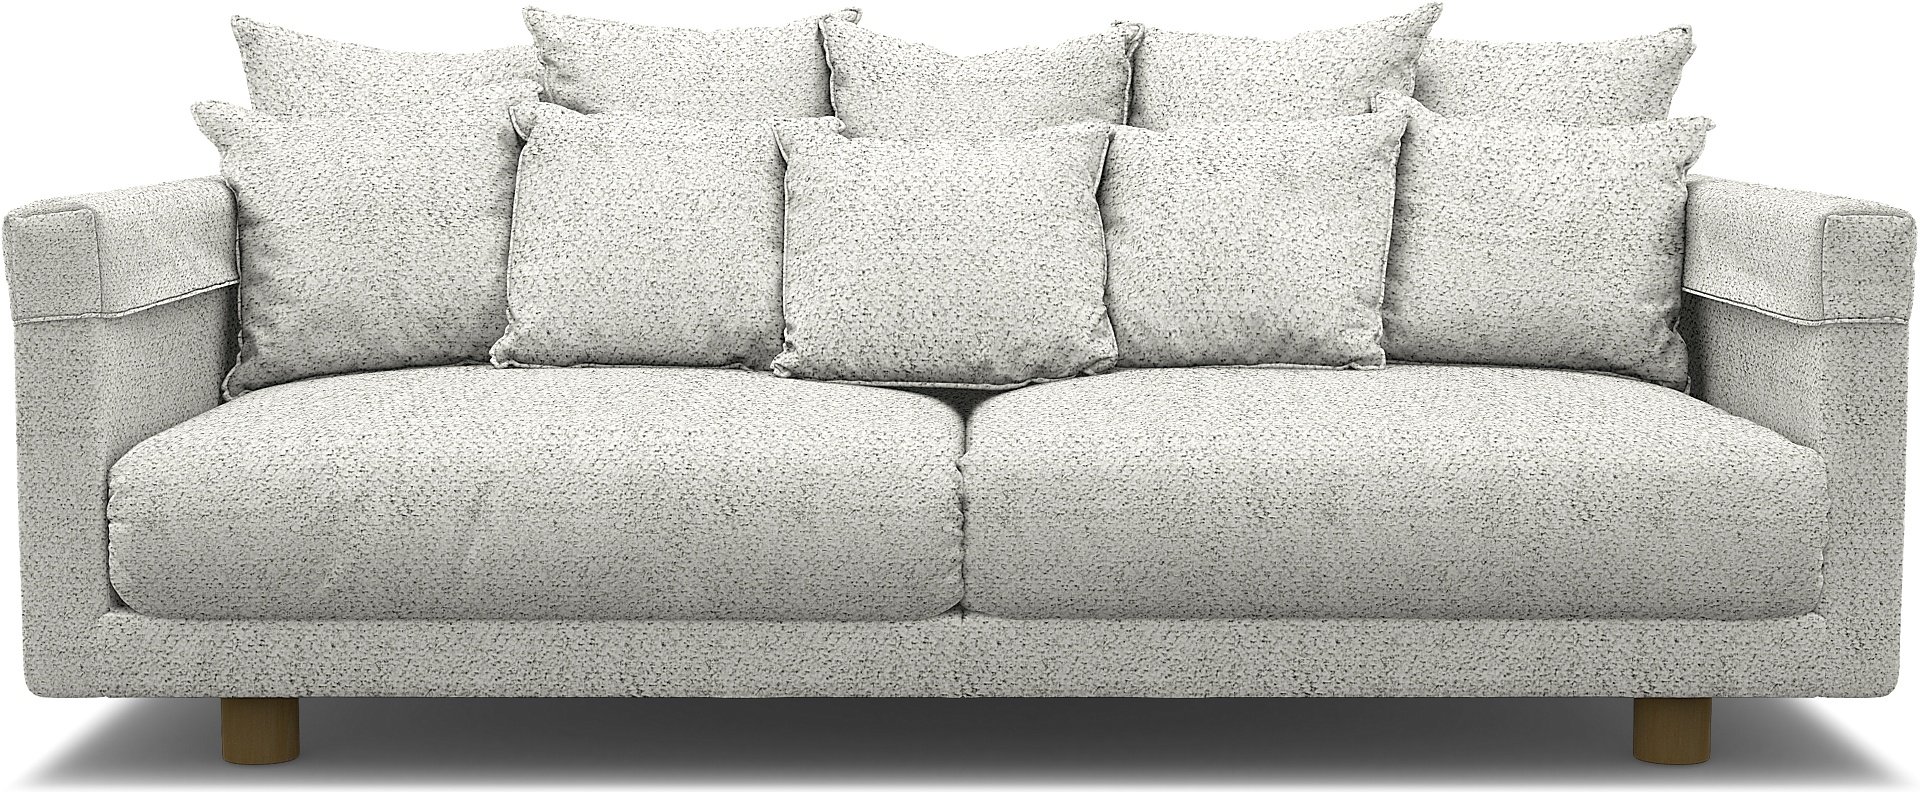 IKEA - Stockholm 2017 3 Seater Sofa Cover, Ivory, Boucle & Texture - Bemz